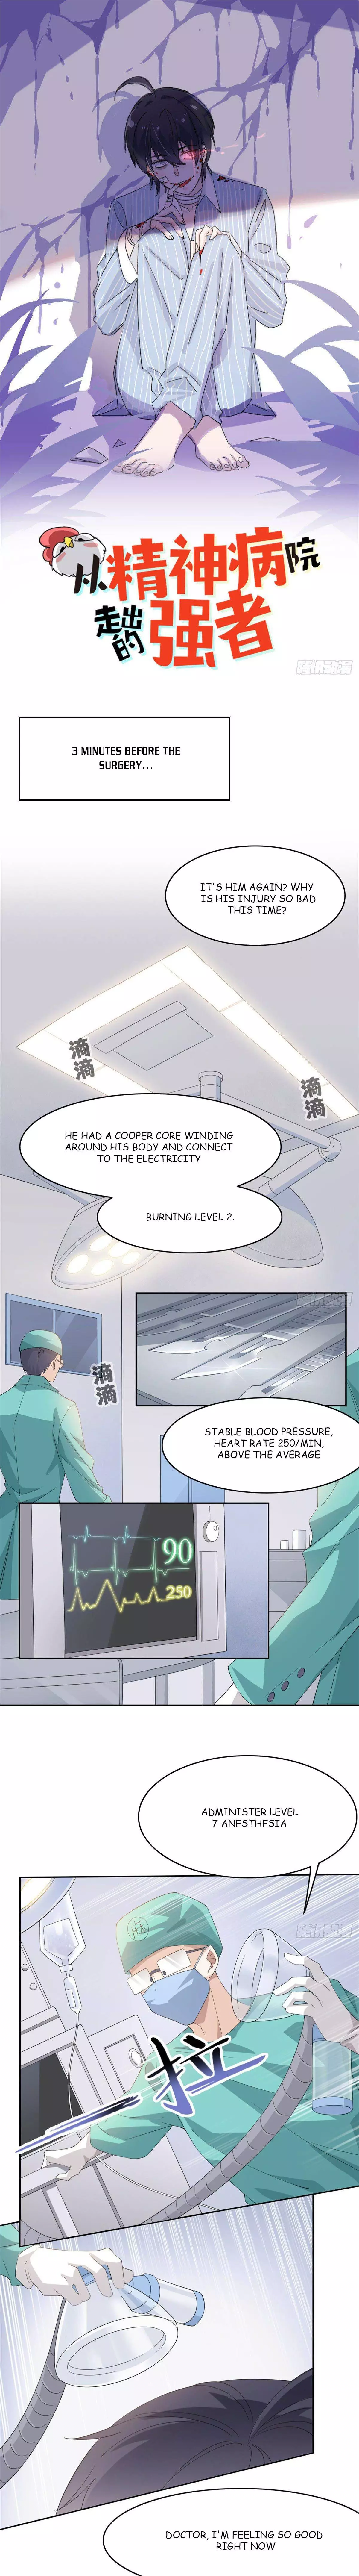 The Strong Man From The Mental Hospital - 2 page 1